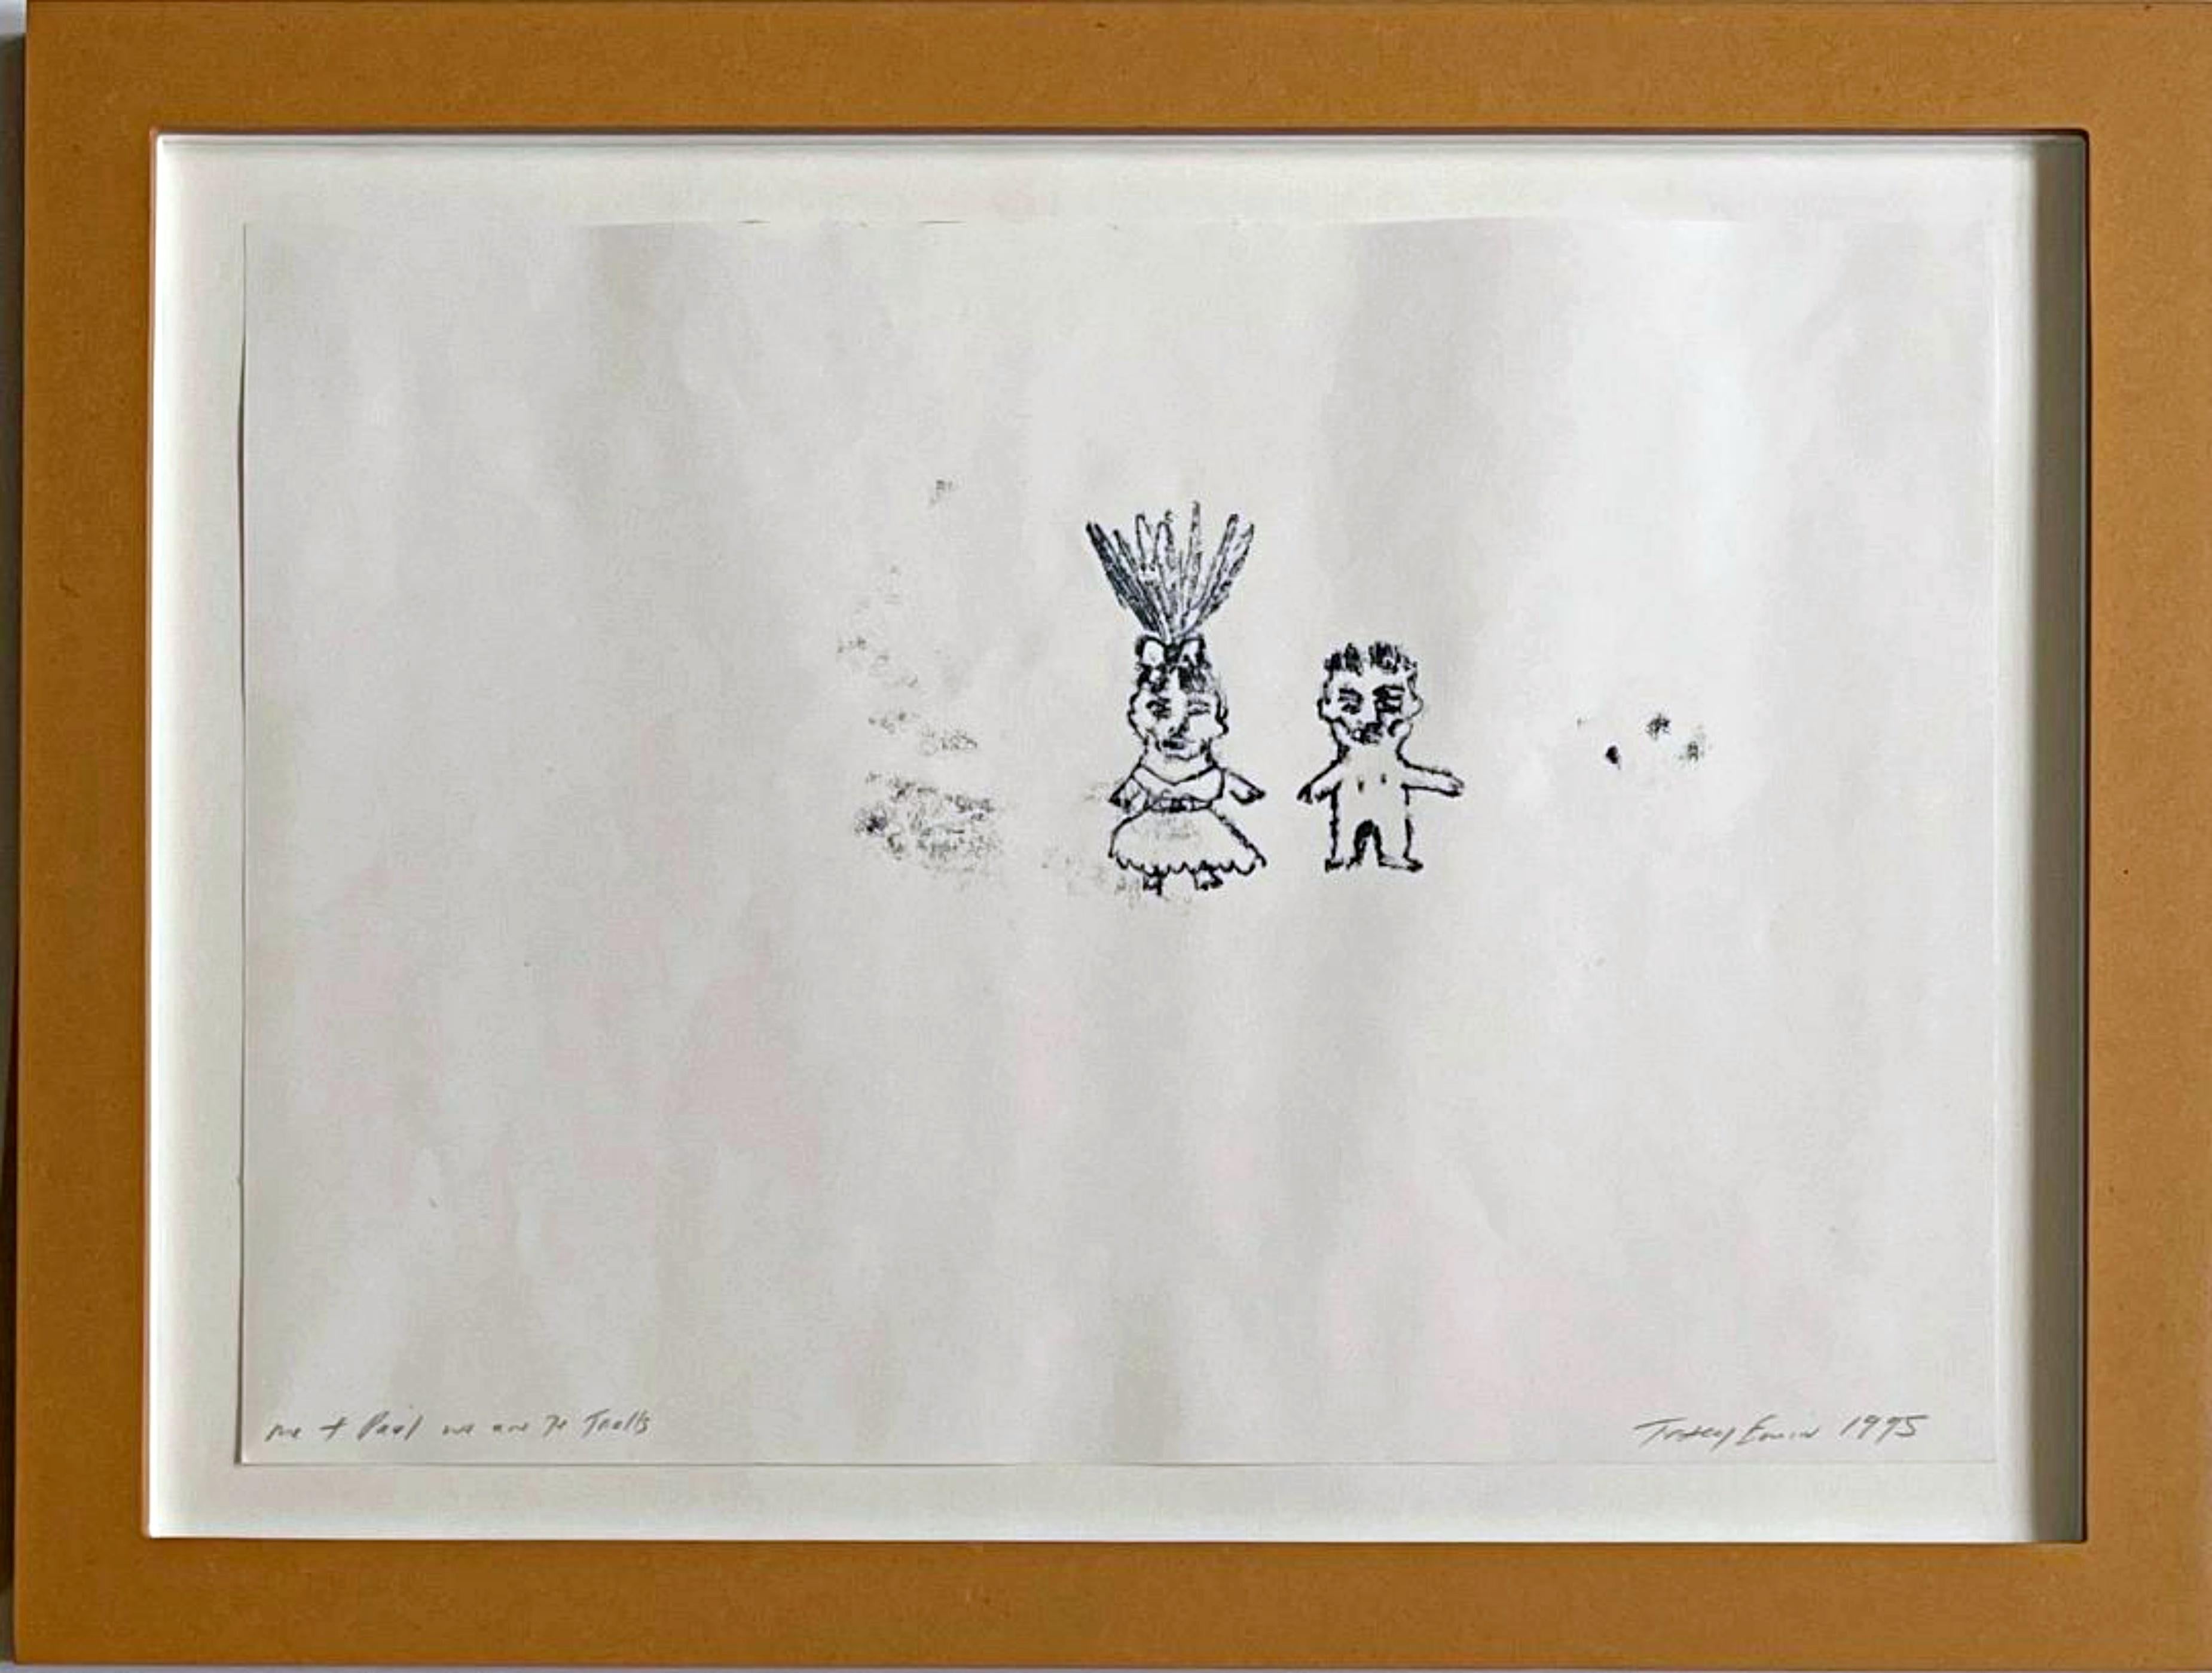 Tracey Emin Abstract Print - Me + Paul We Are the Trolls (famous monoprint from Douglas Cramer's collection)